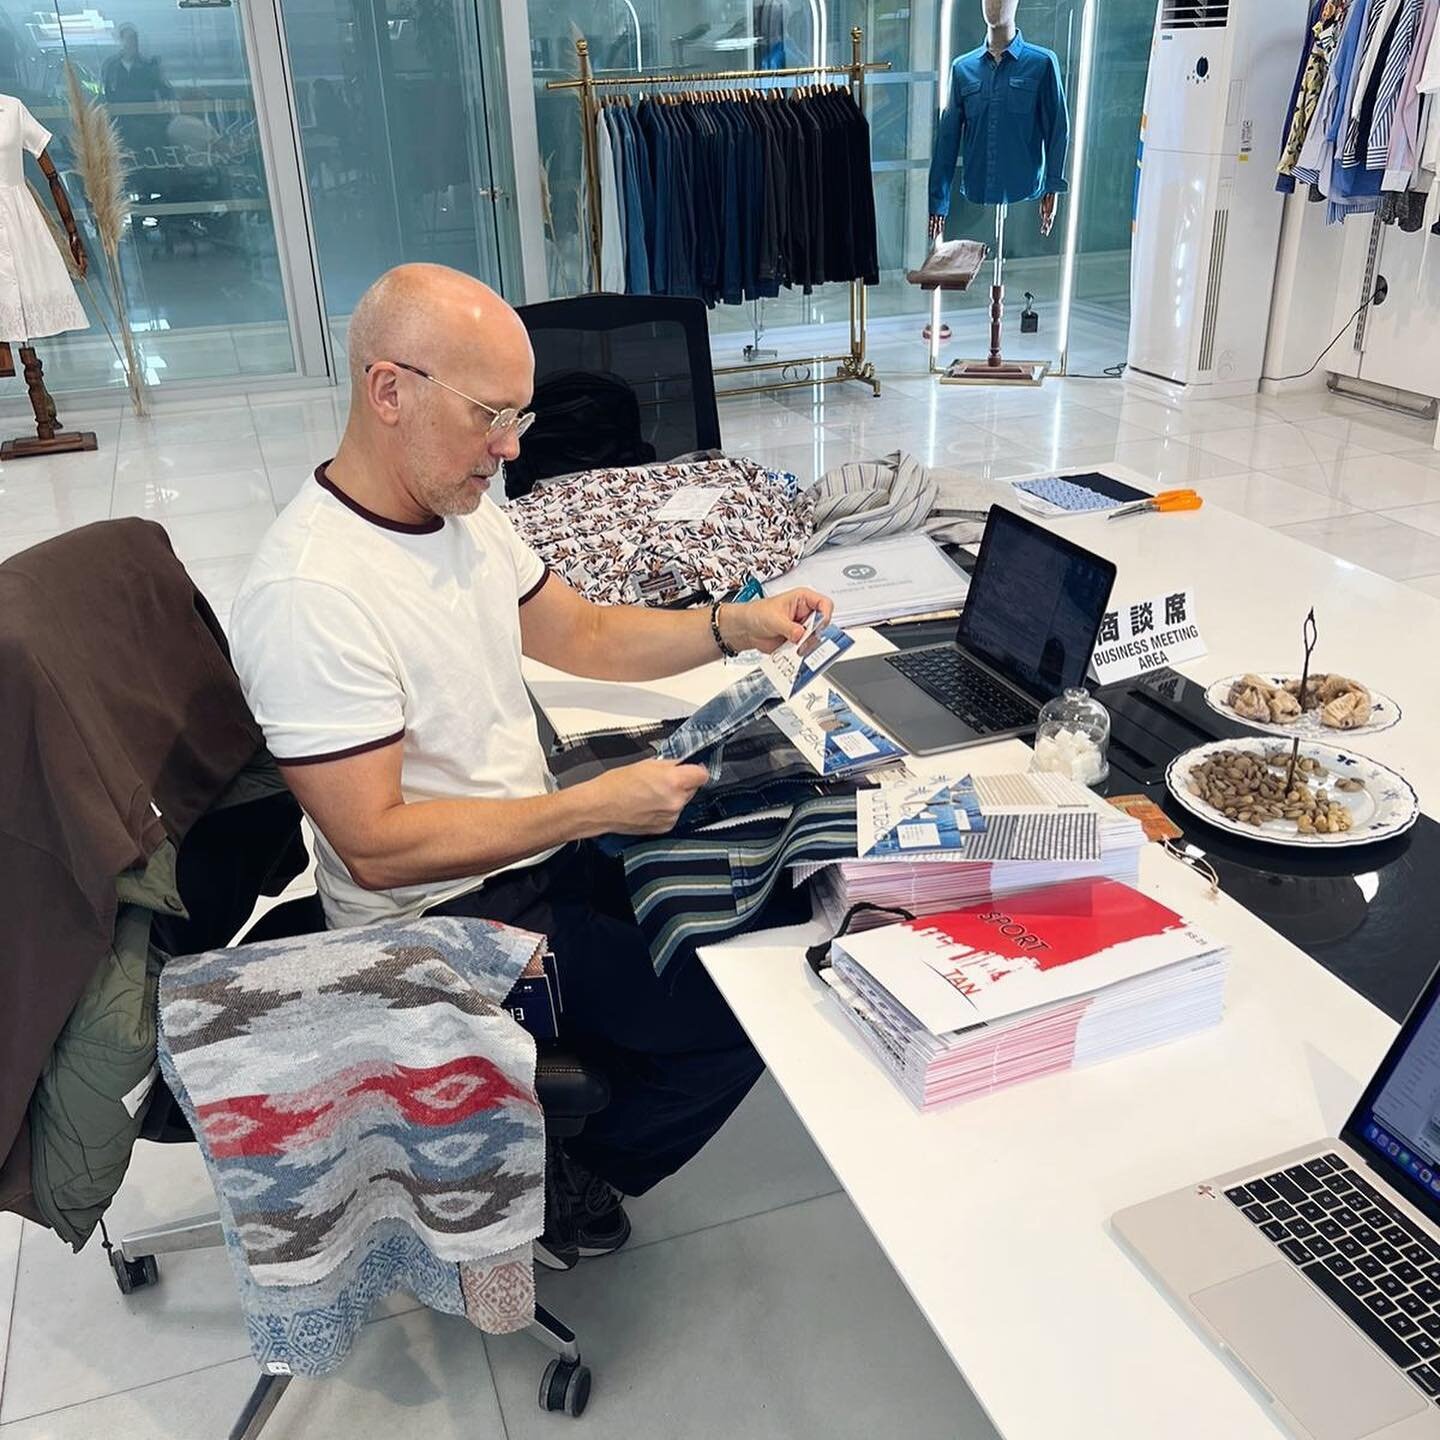 Our Design Director recently visited our partners in T&uuml;rkiye to research developments for our customers and our in-house brands Burgs and Oiler &amp; Boiler. 

Get a peek into his productive visit! 🔝

#Cpgroup #Cpteam #development #design #fash